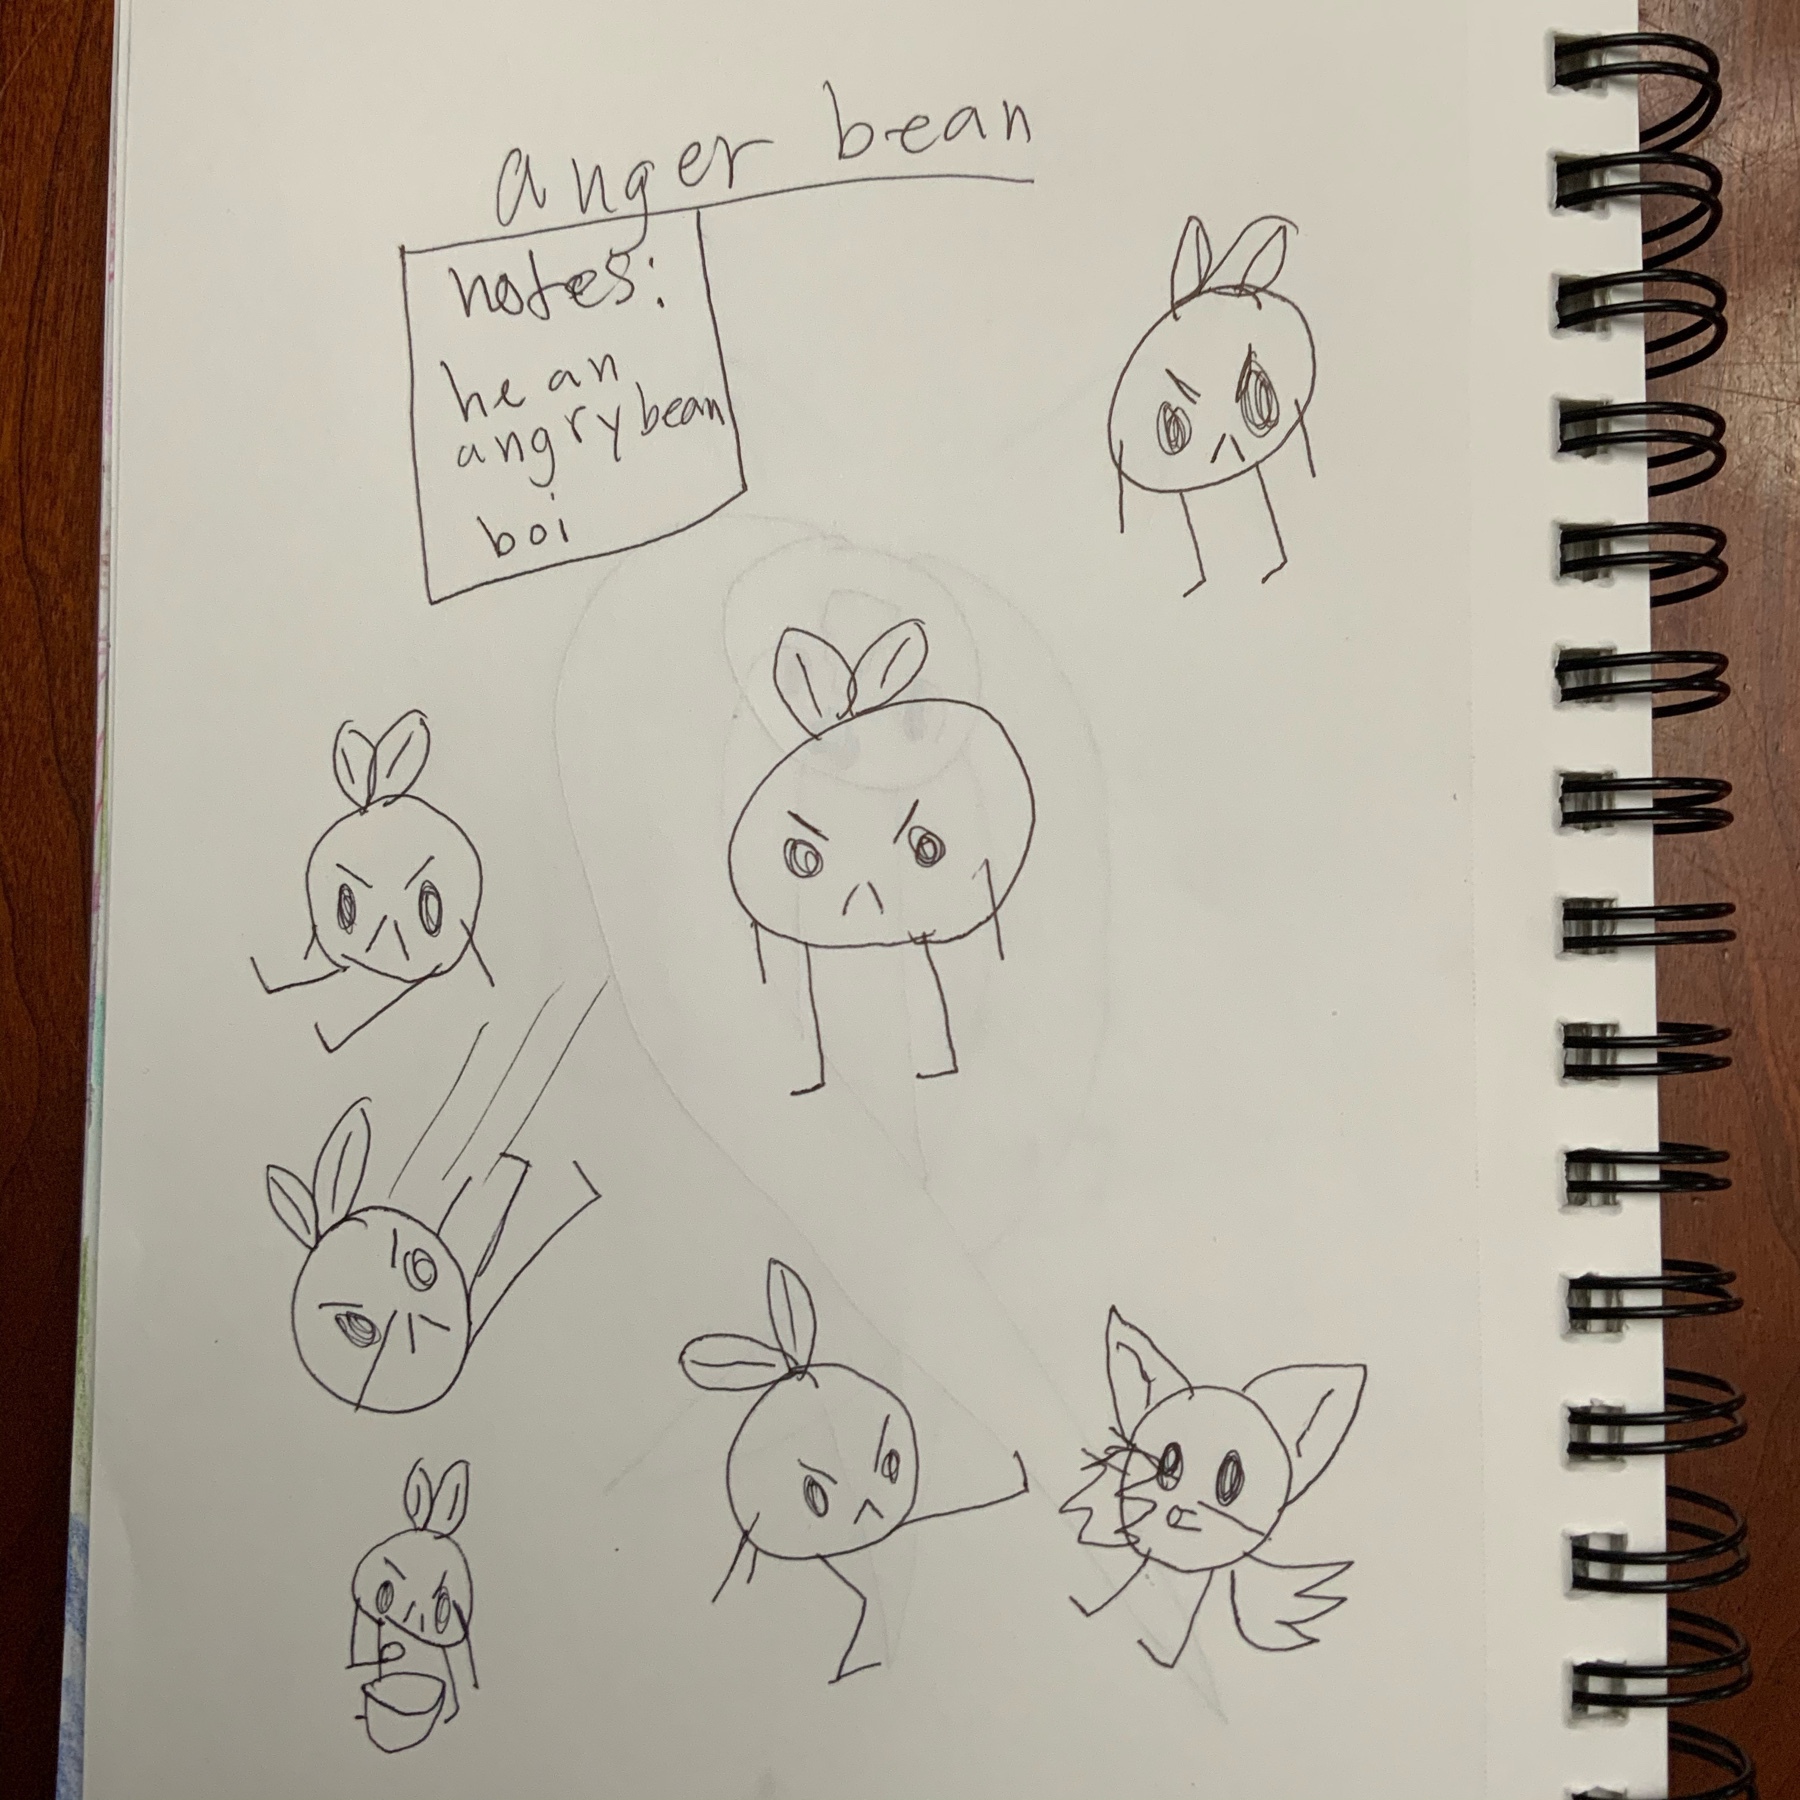 Many poses for Anger Bean